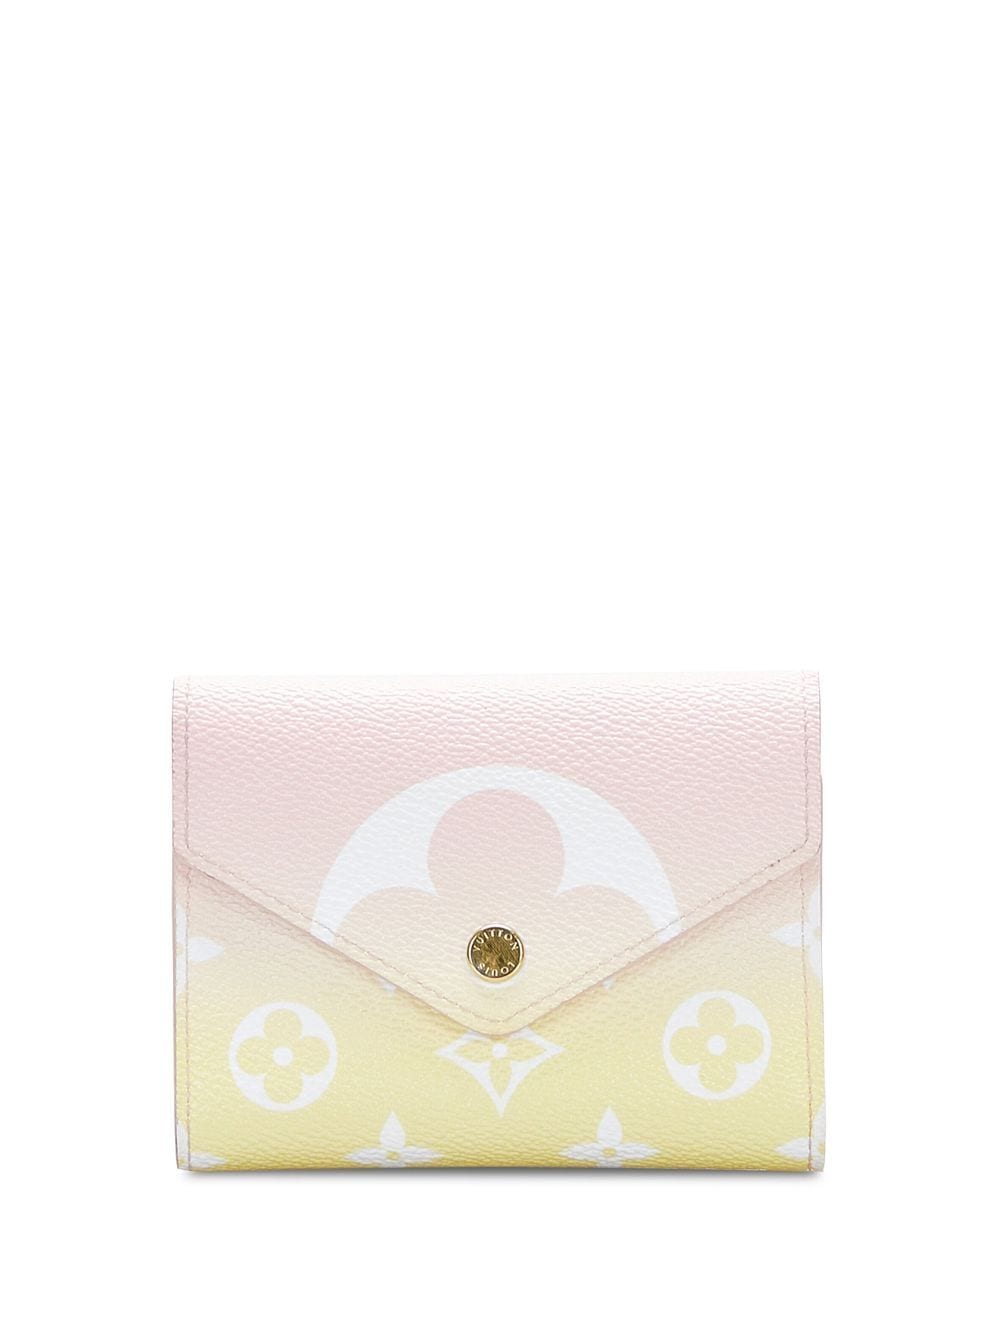 Products By Louis Vuitton: Lv Escale Zoe Wallet